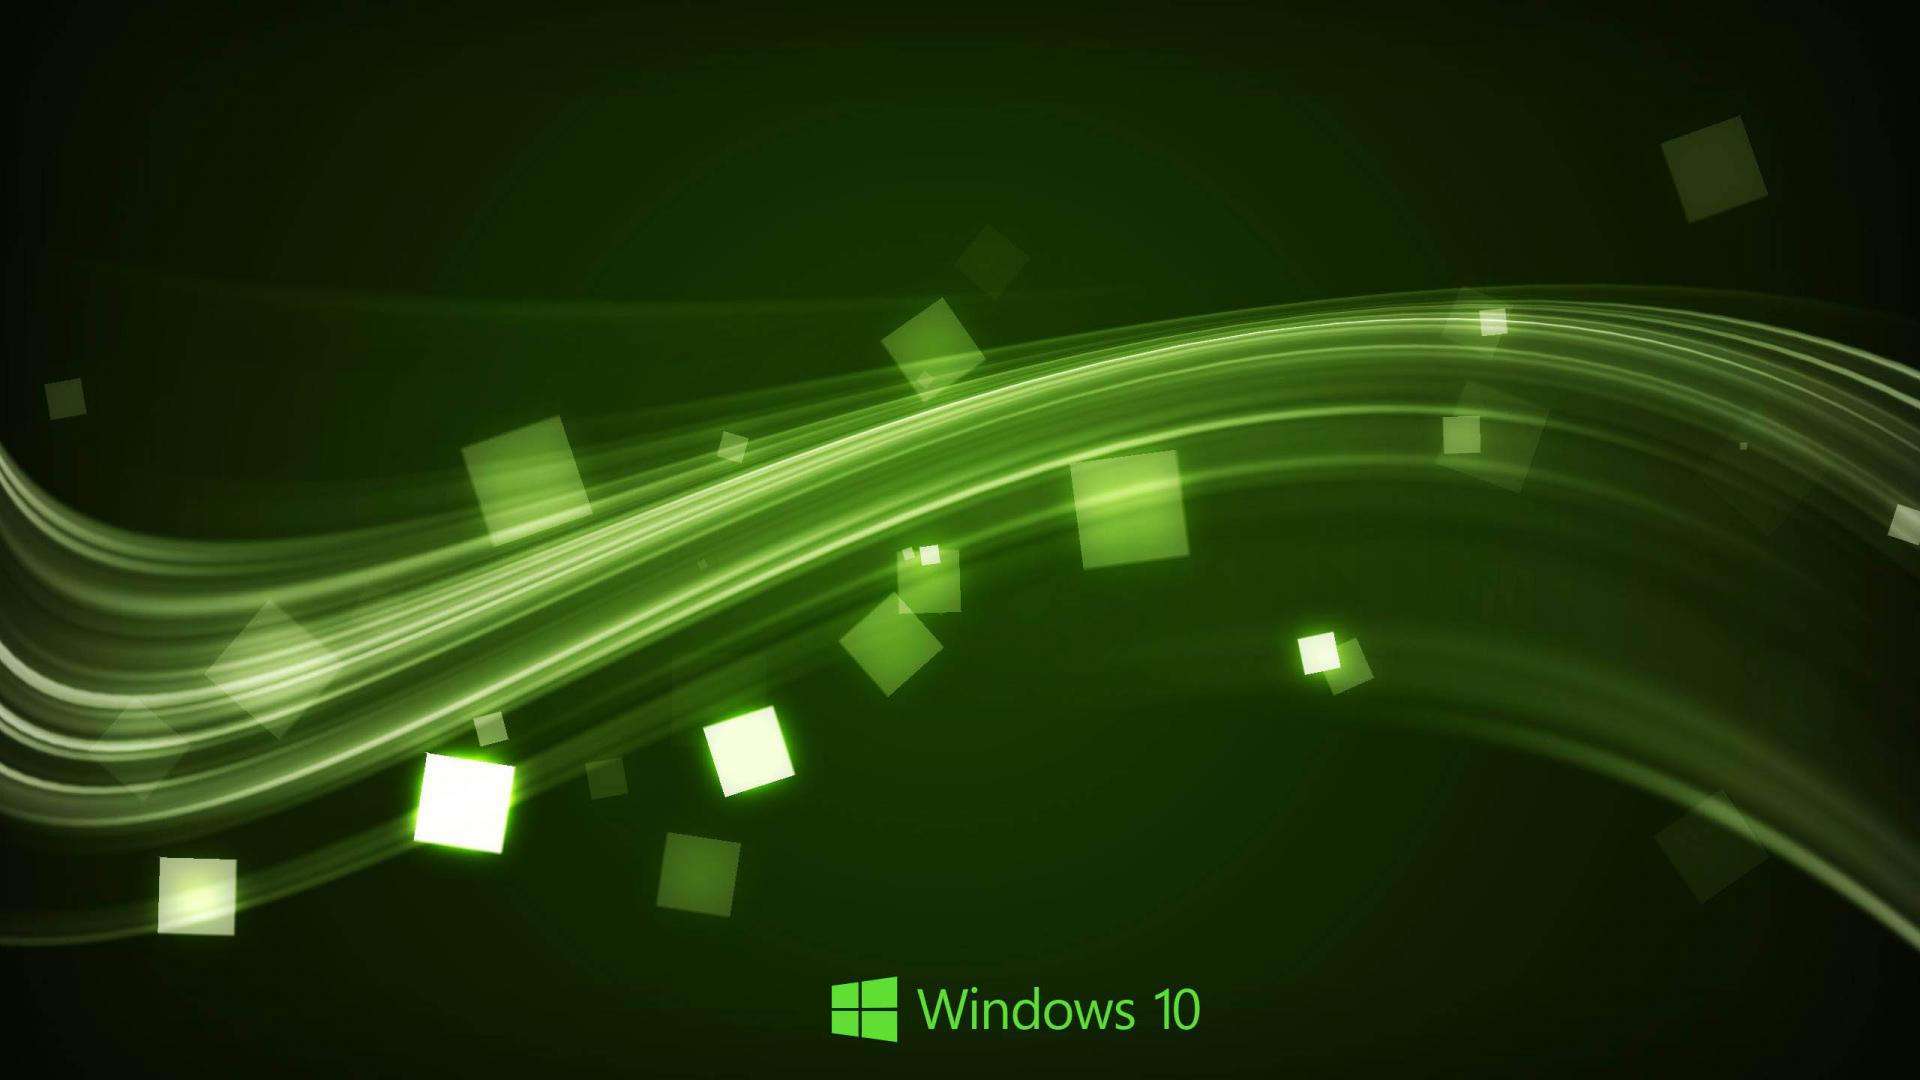 Wallpaper Windows HD 1080p Upload At June By